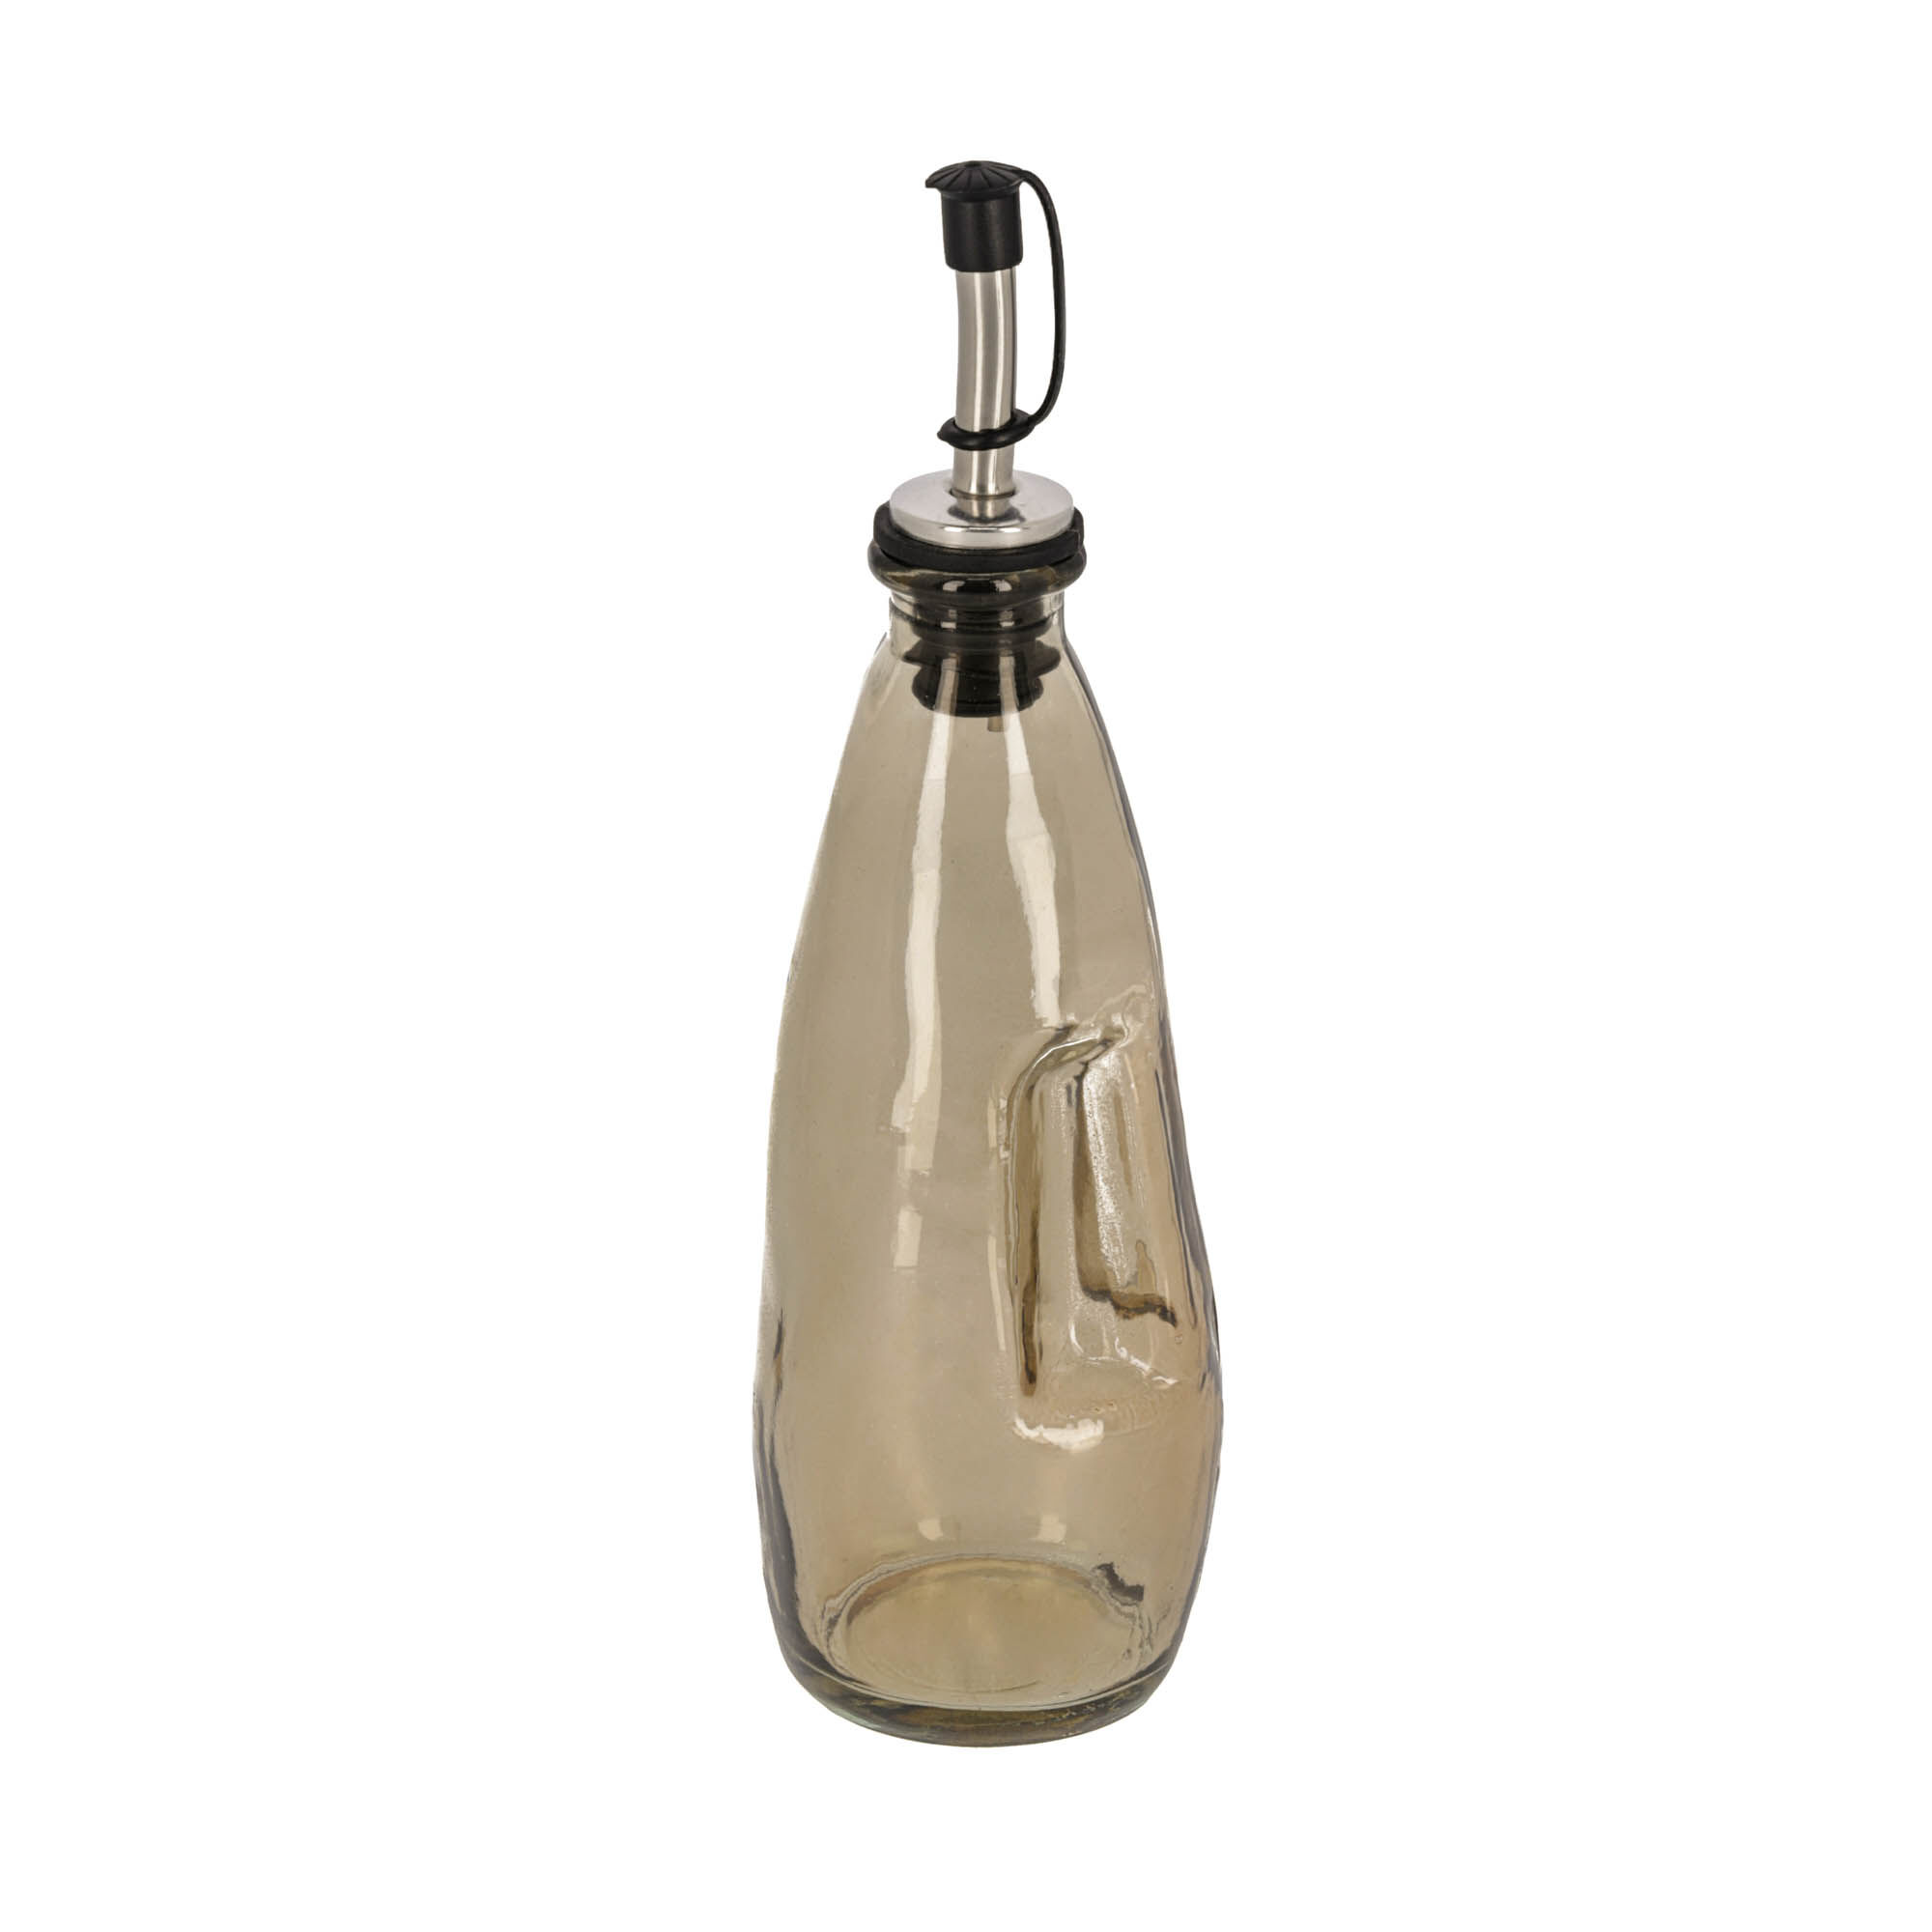 Kave Home Rohan brown glass oil bottle